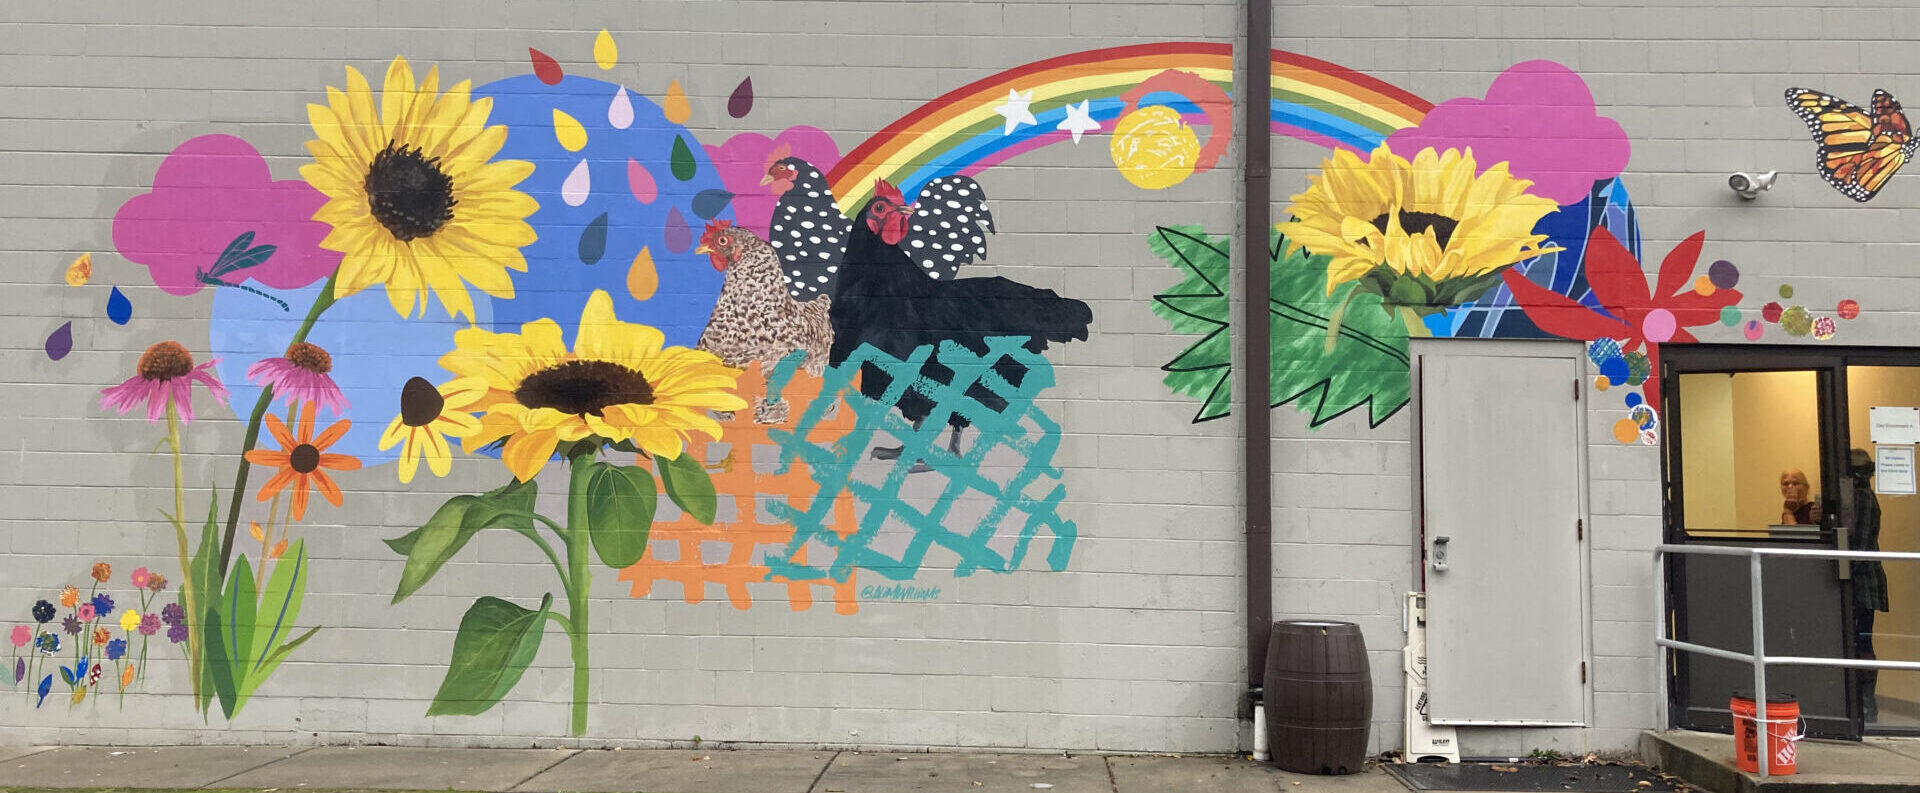 Mural at the Jacob Schaefer Center for adults with autism and intellectual disabilities 